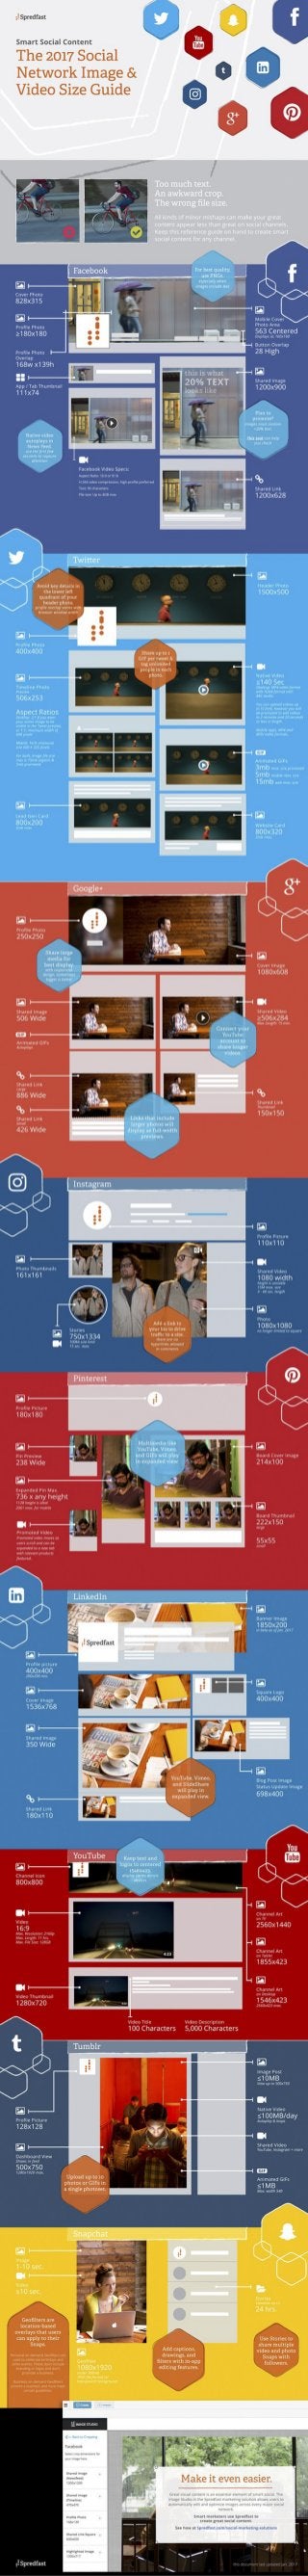 2017 Social Network Image & Video Size Guide